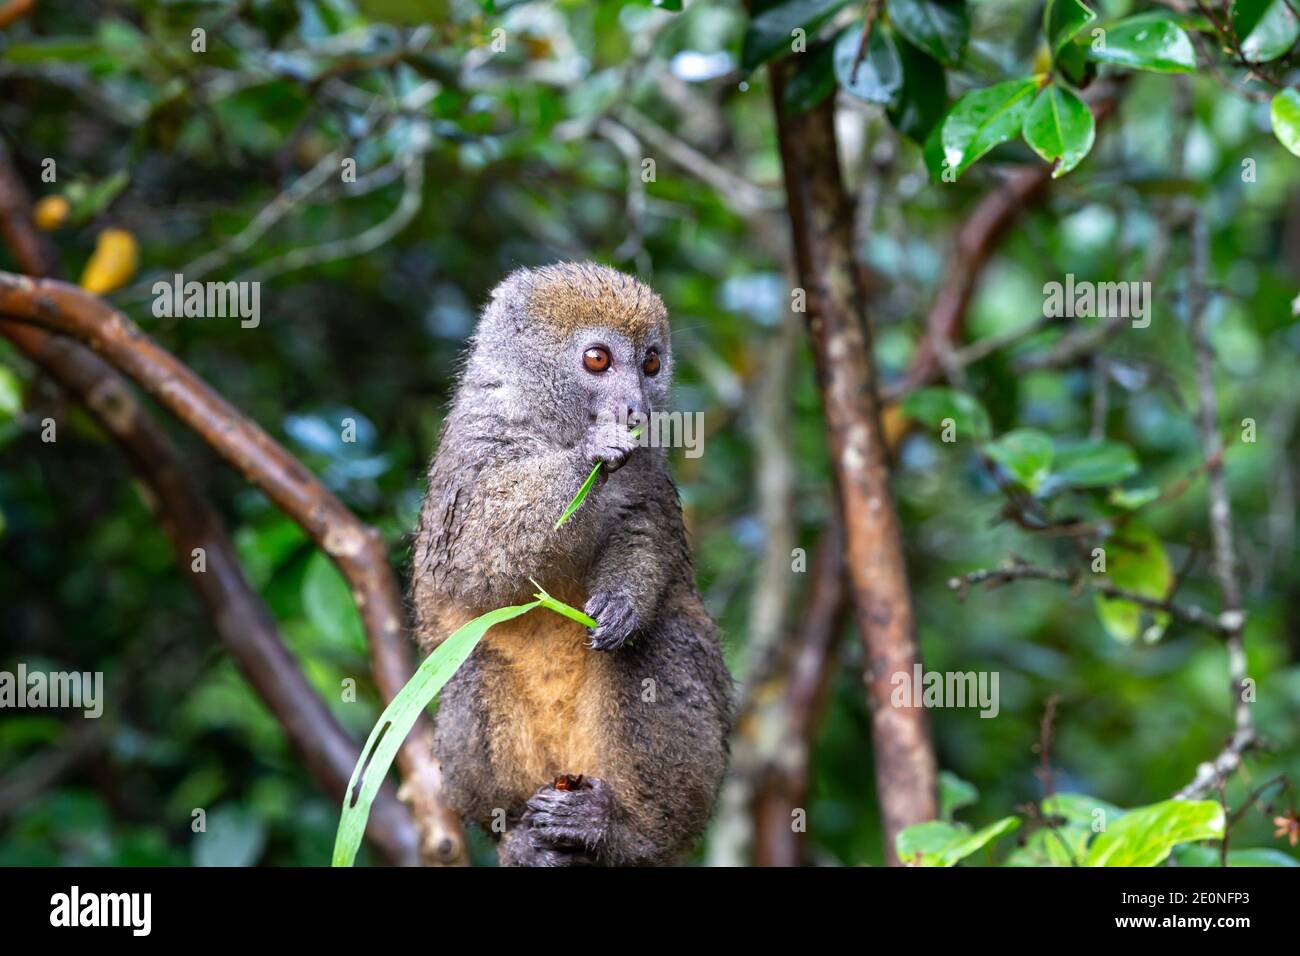 One small lemur on a branch eats on a blade of grass. Stock Photo